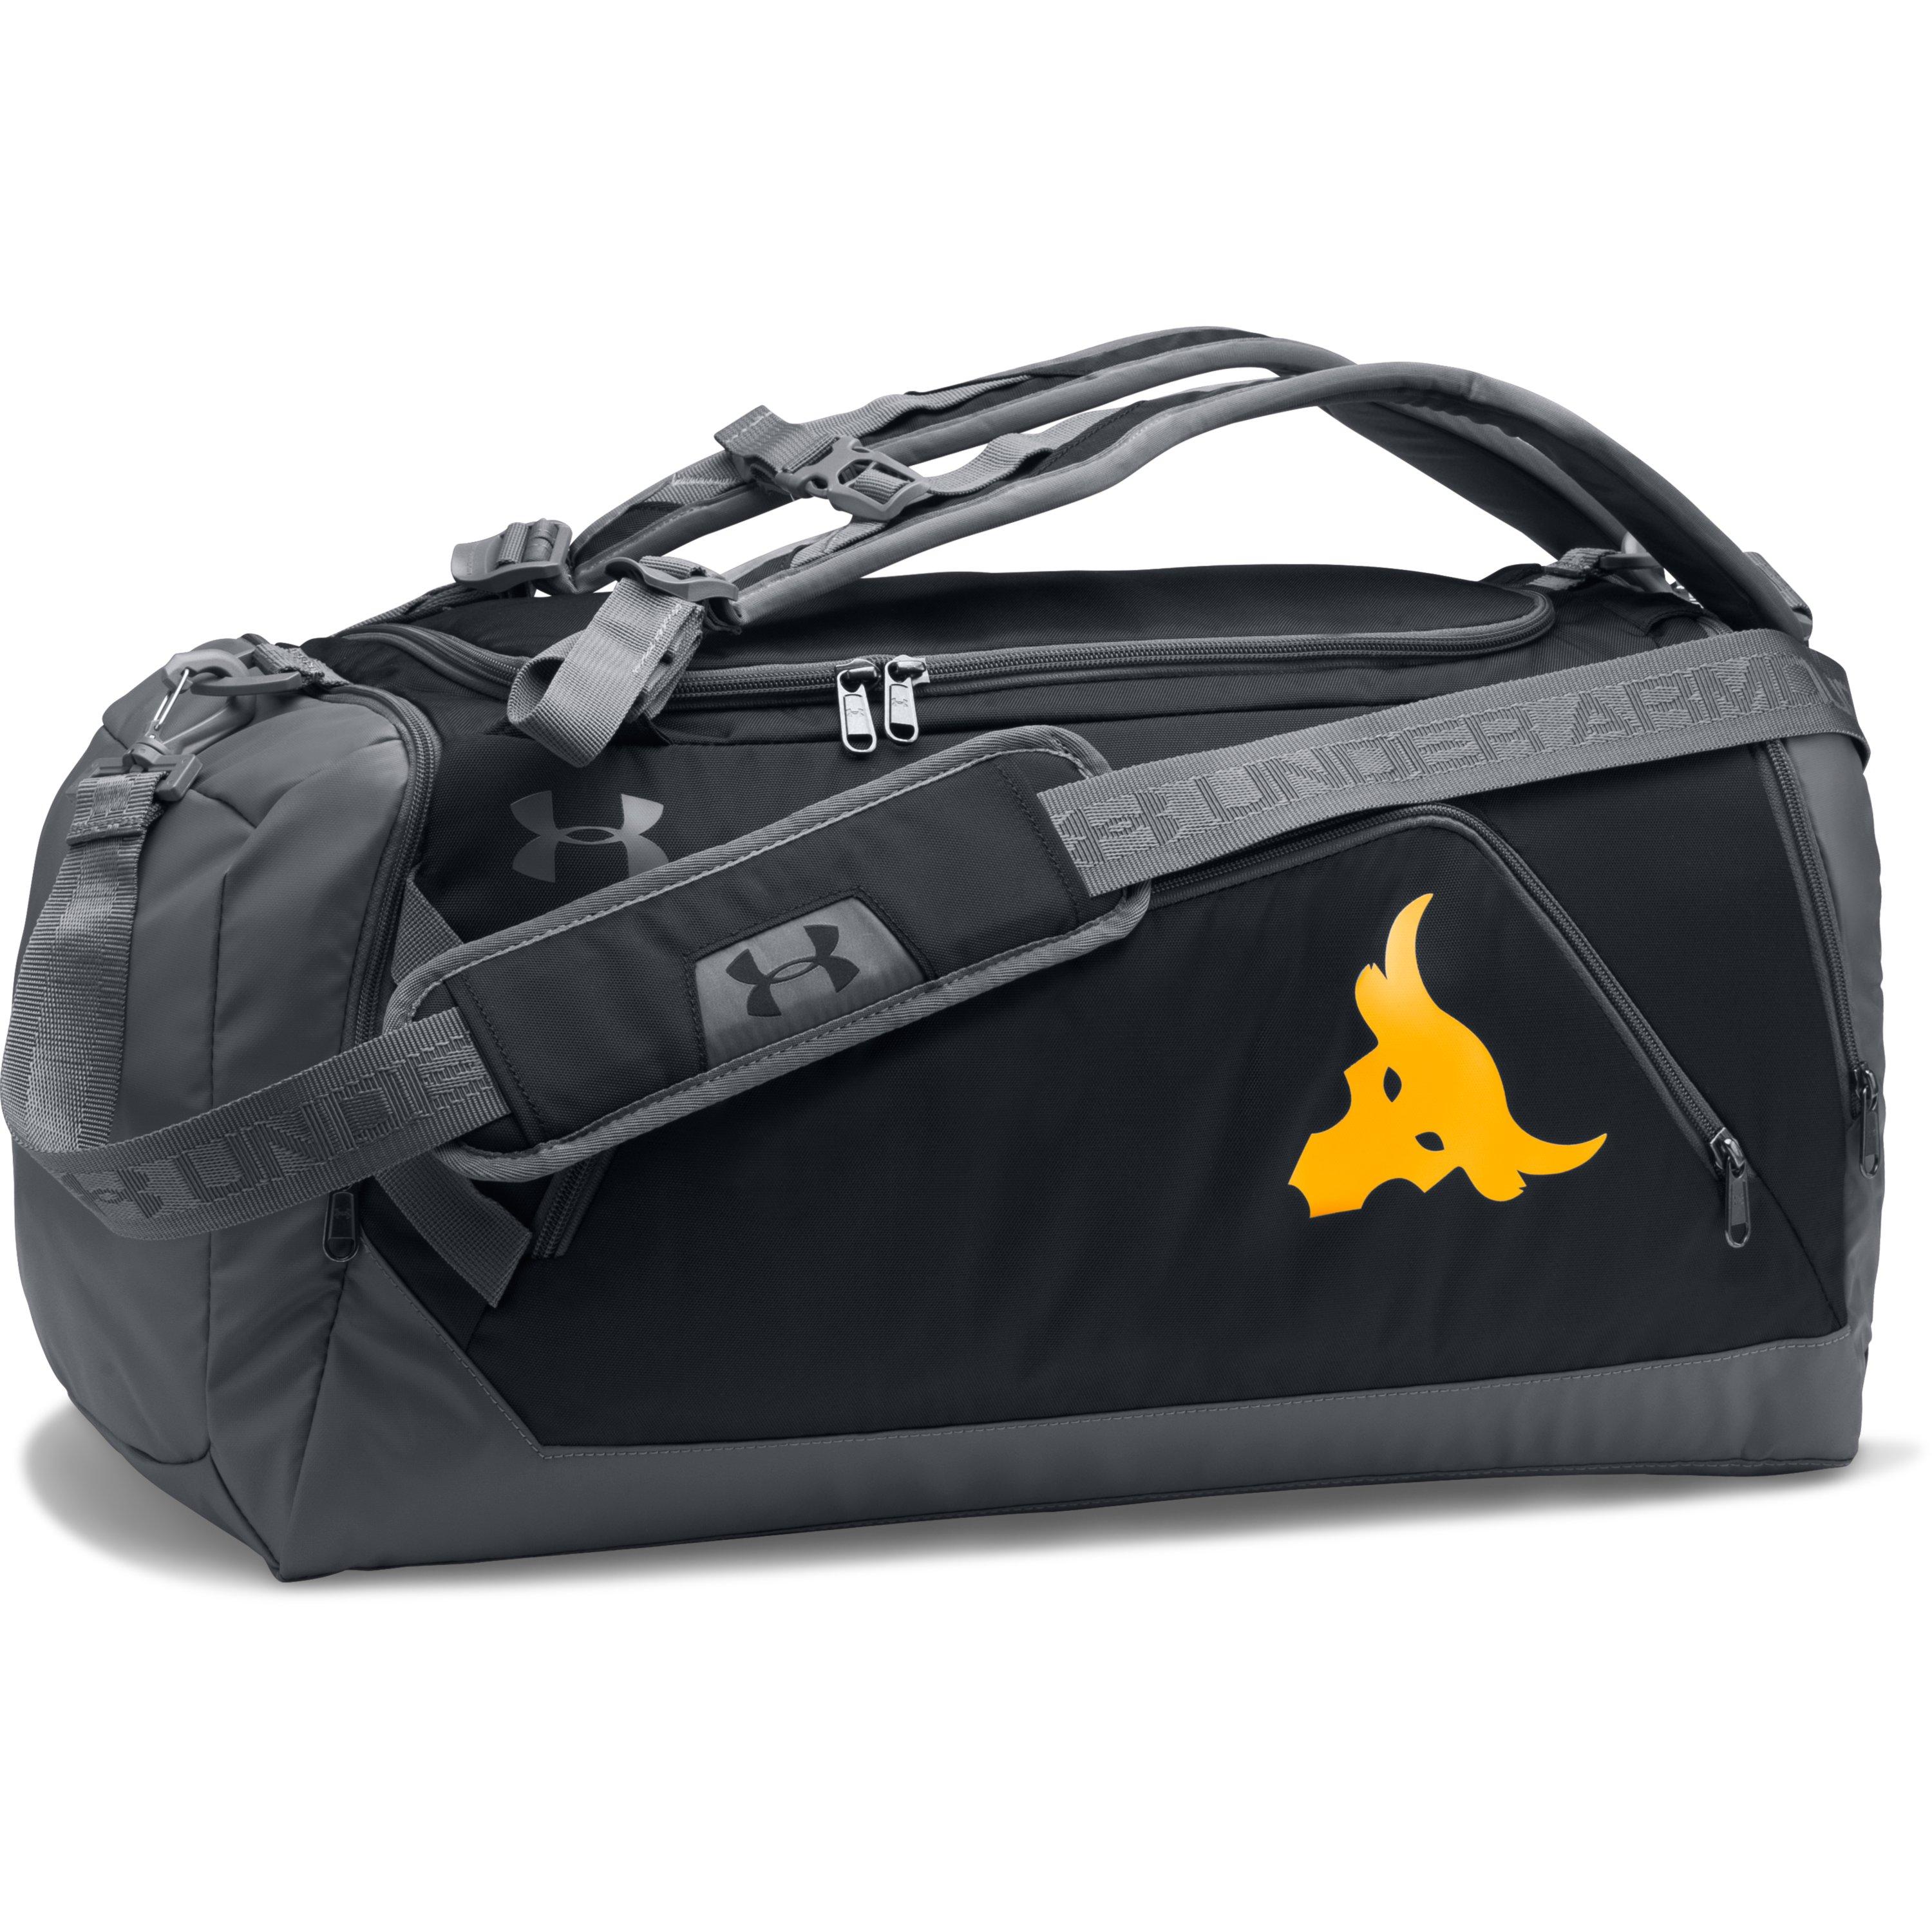 Under Armour Ua X Project Rock Contain Backpack Duffle 3.0 in Black  /Graphite (Black) for Men - Lyst